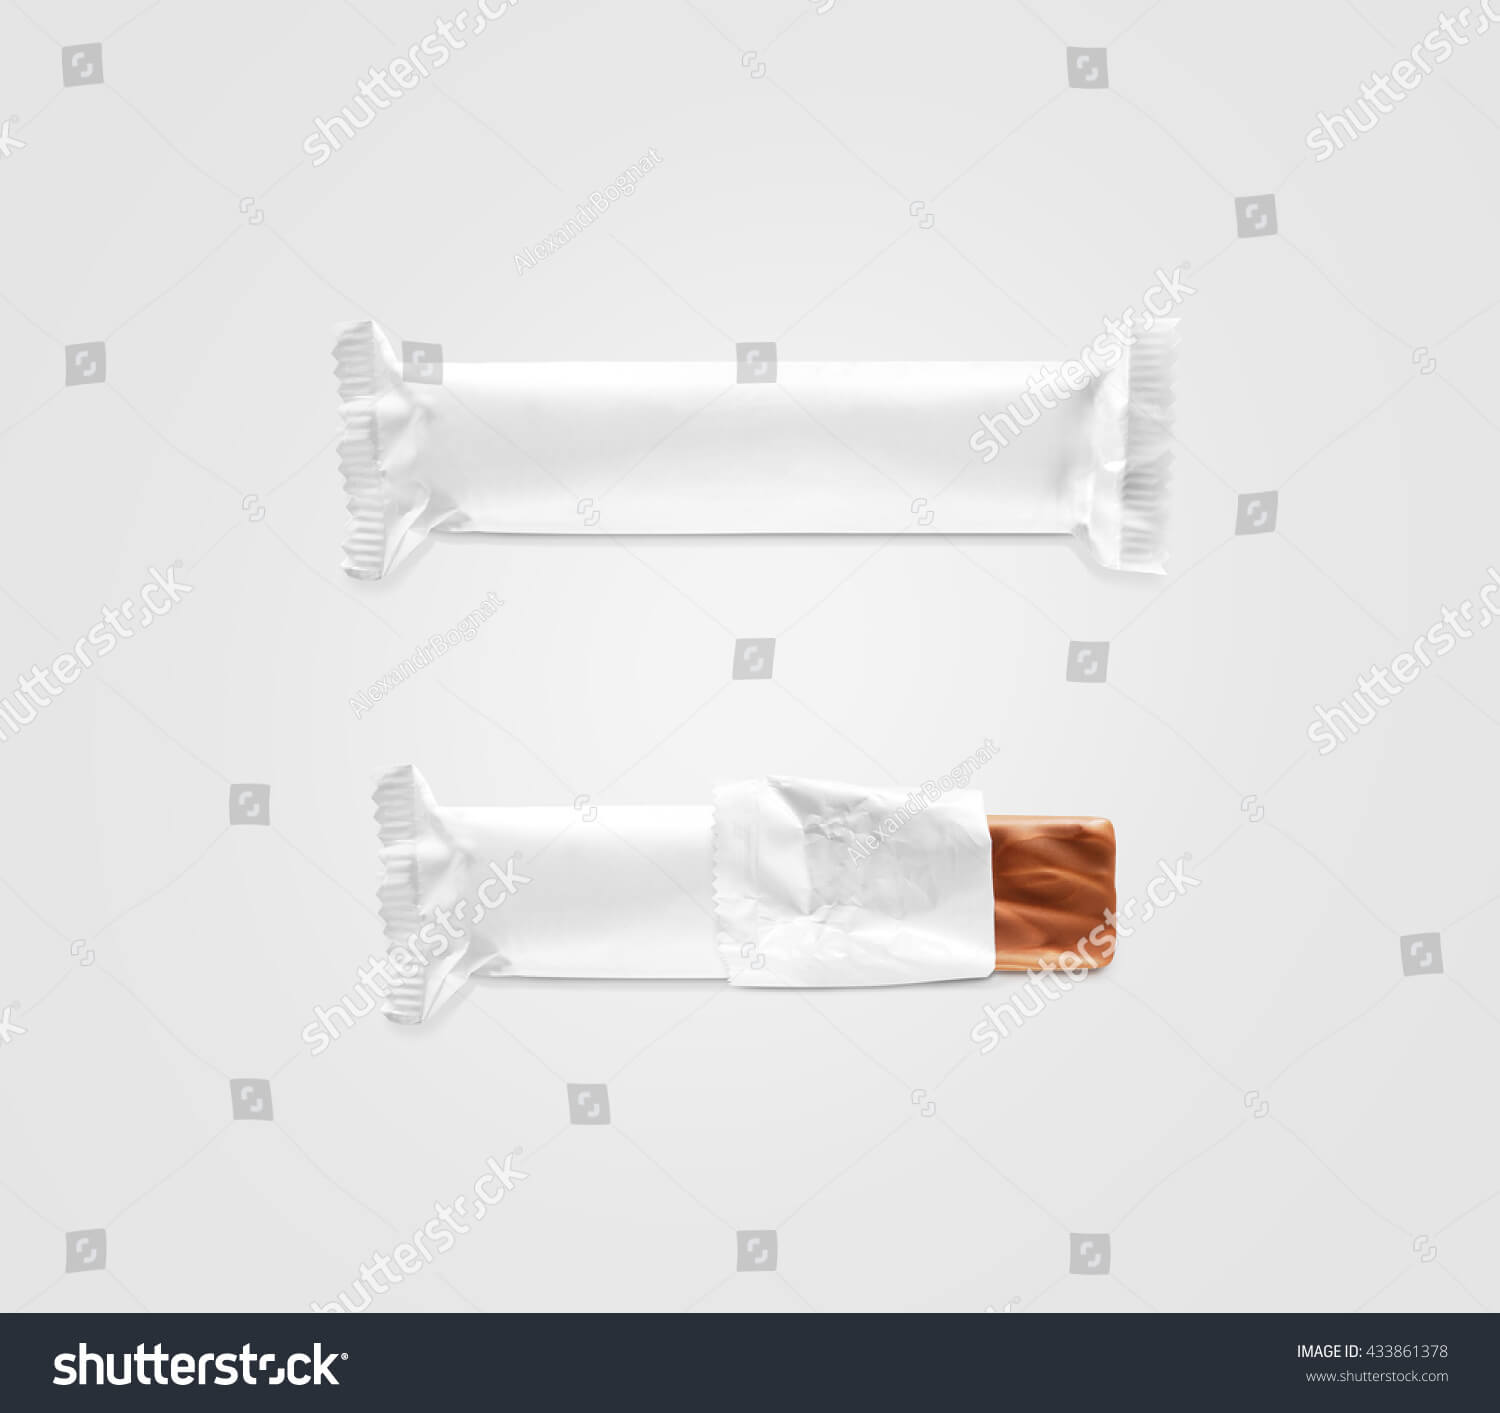 Blank White Candy Bar Plastic Wrap Stock Photo (Edit Now For Free Blank Candy Bar Wrapper Template